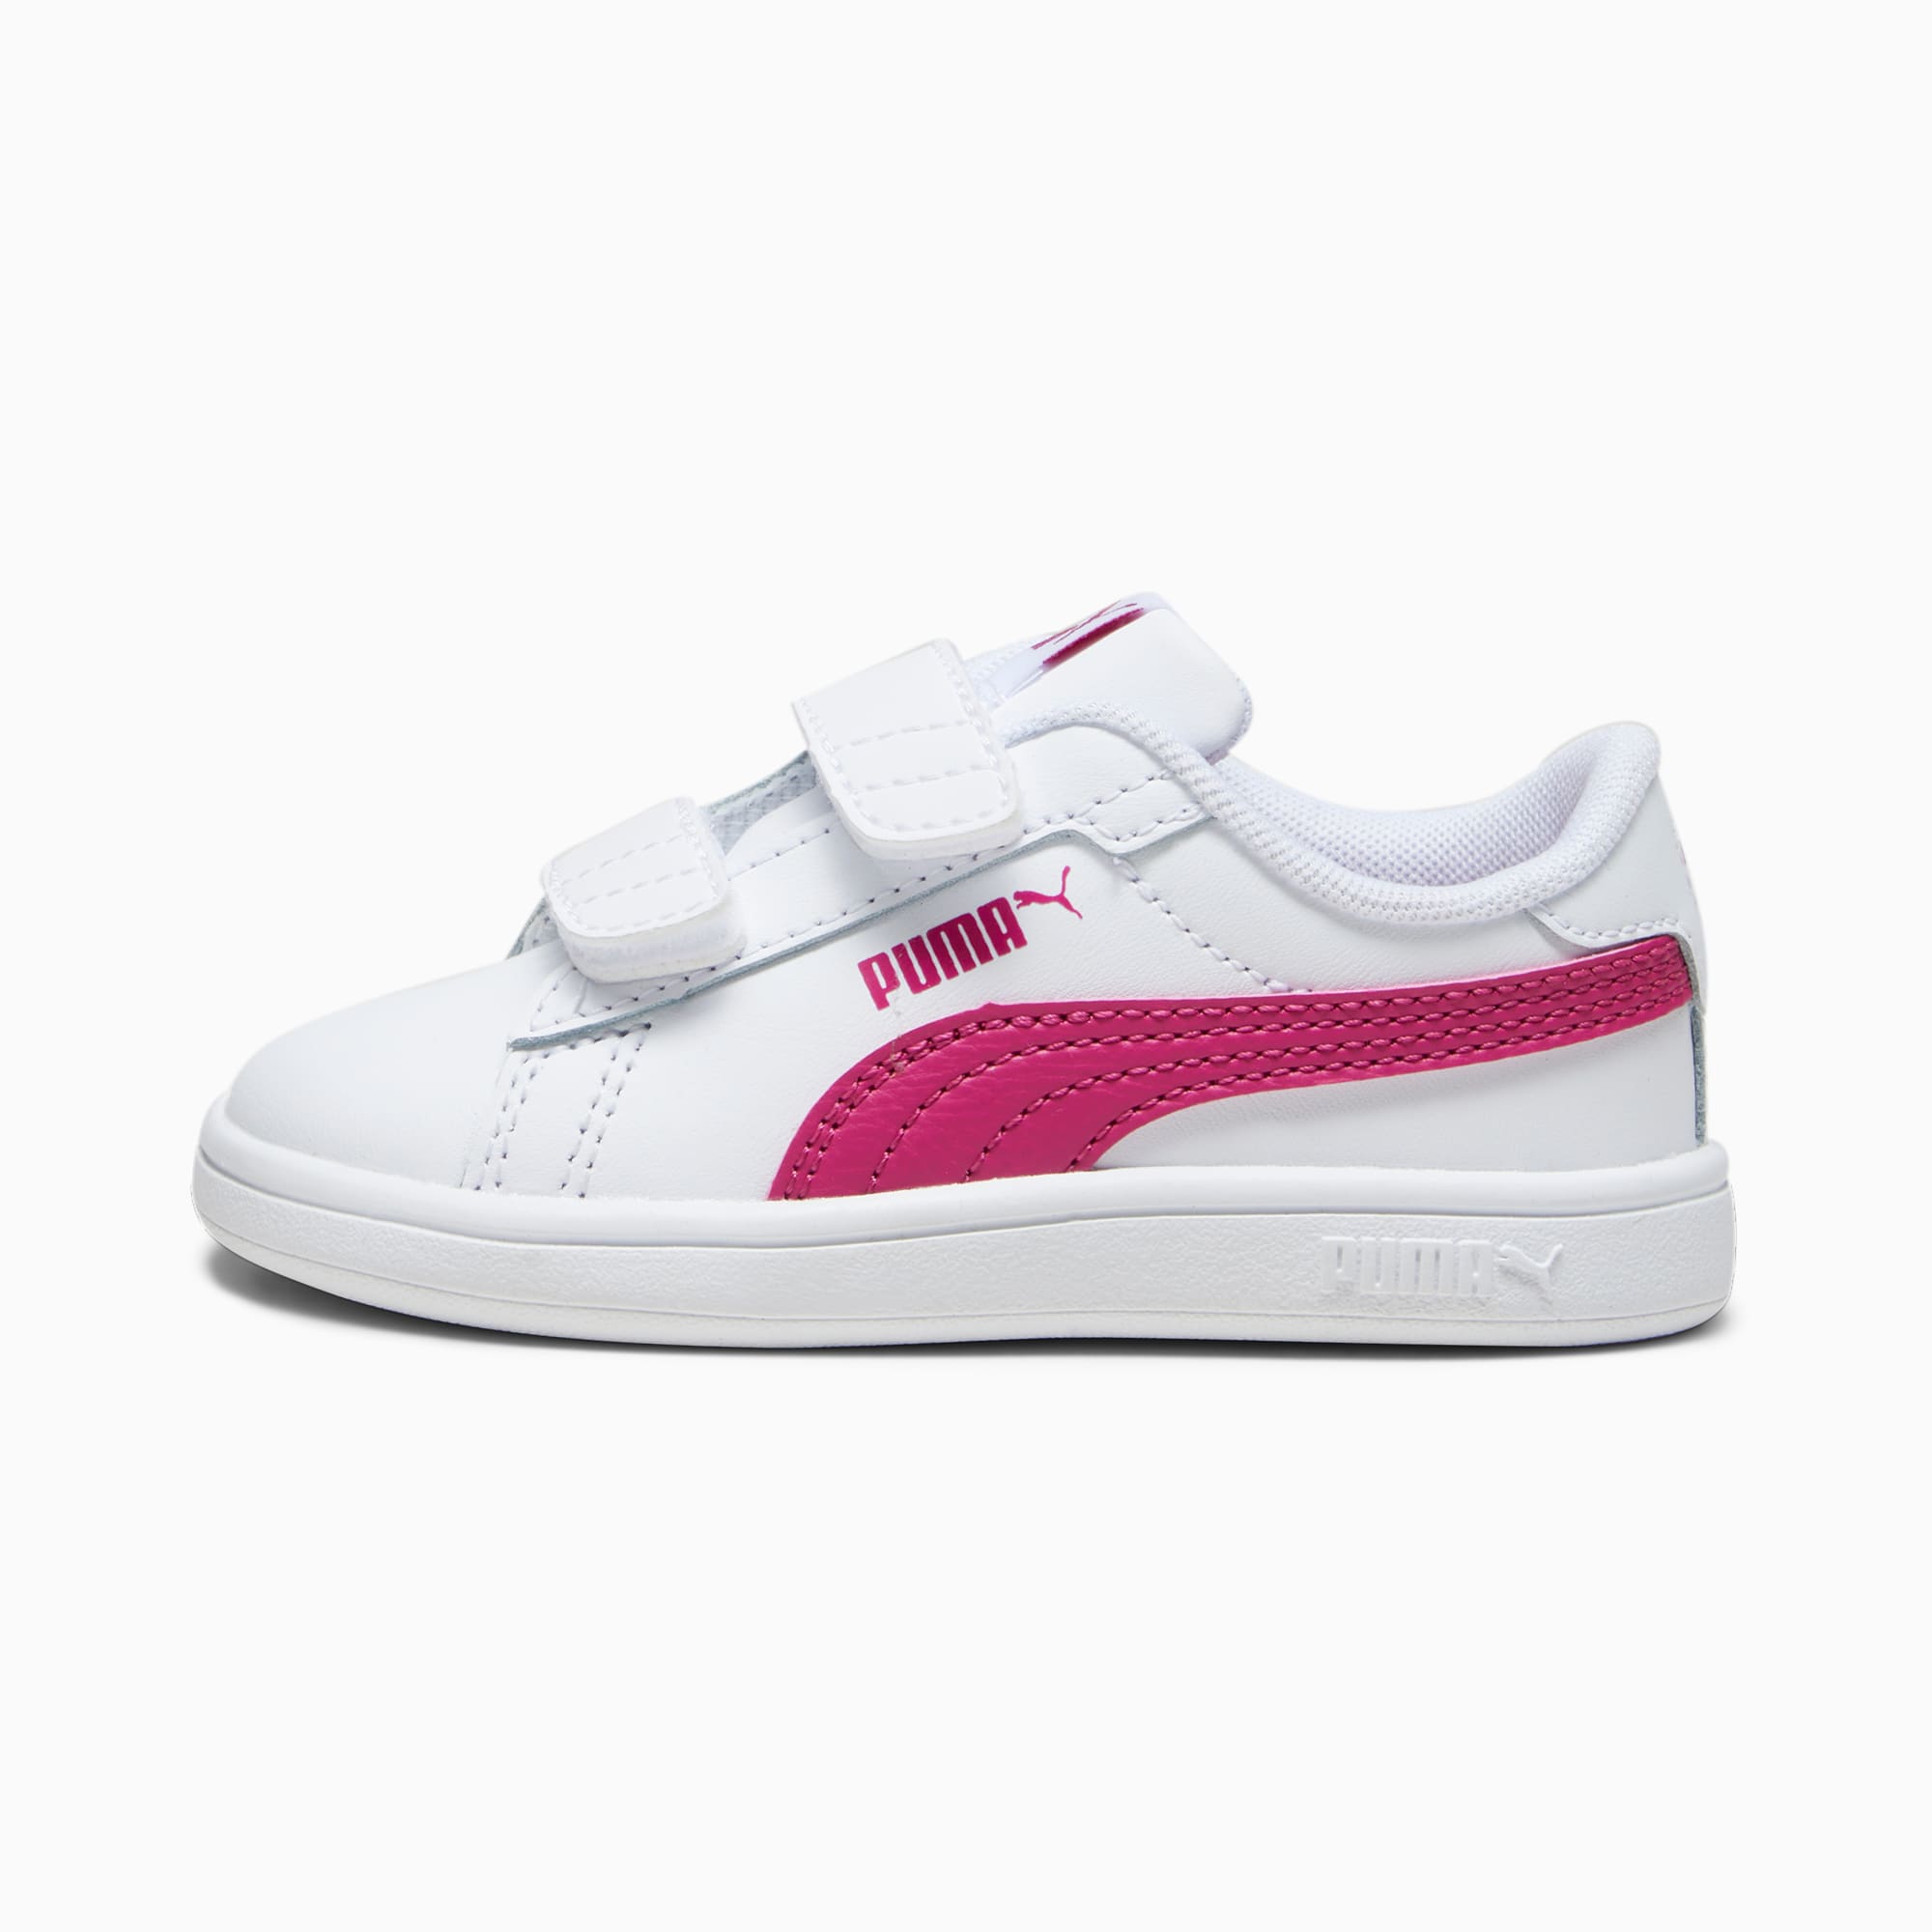 PUMA Smash 3.0 Leather V Sneakers Baby, White/Pinktastic, Size 19, Shoes